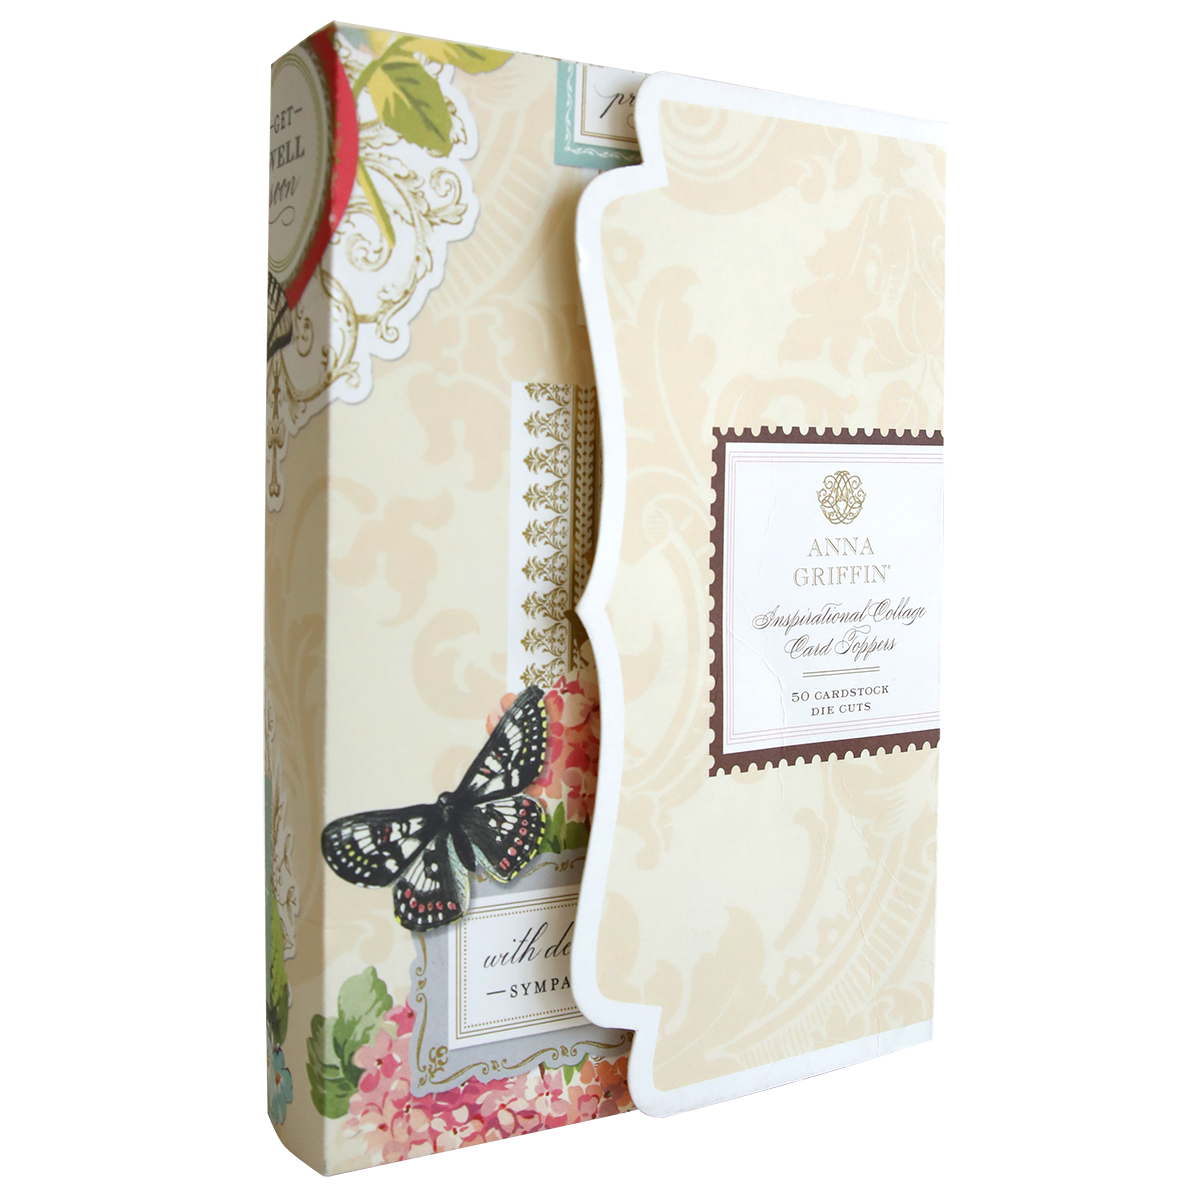 Elegant handmade Inspirational Collage Card Toppers with floral designs and a butterfly motif.